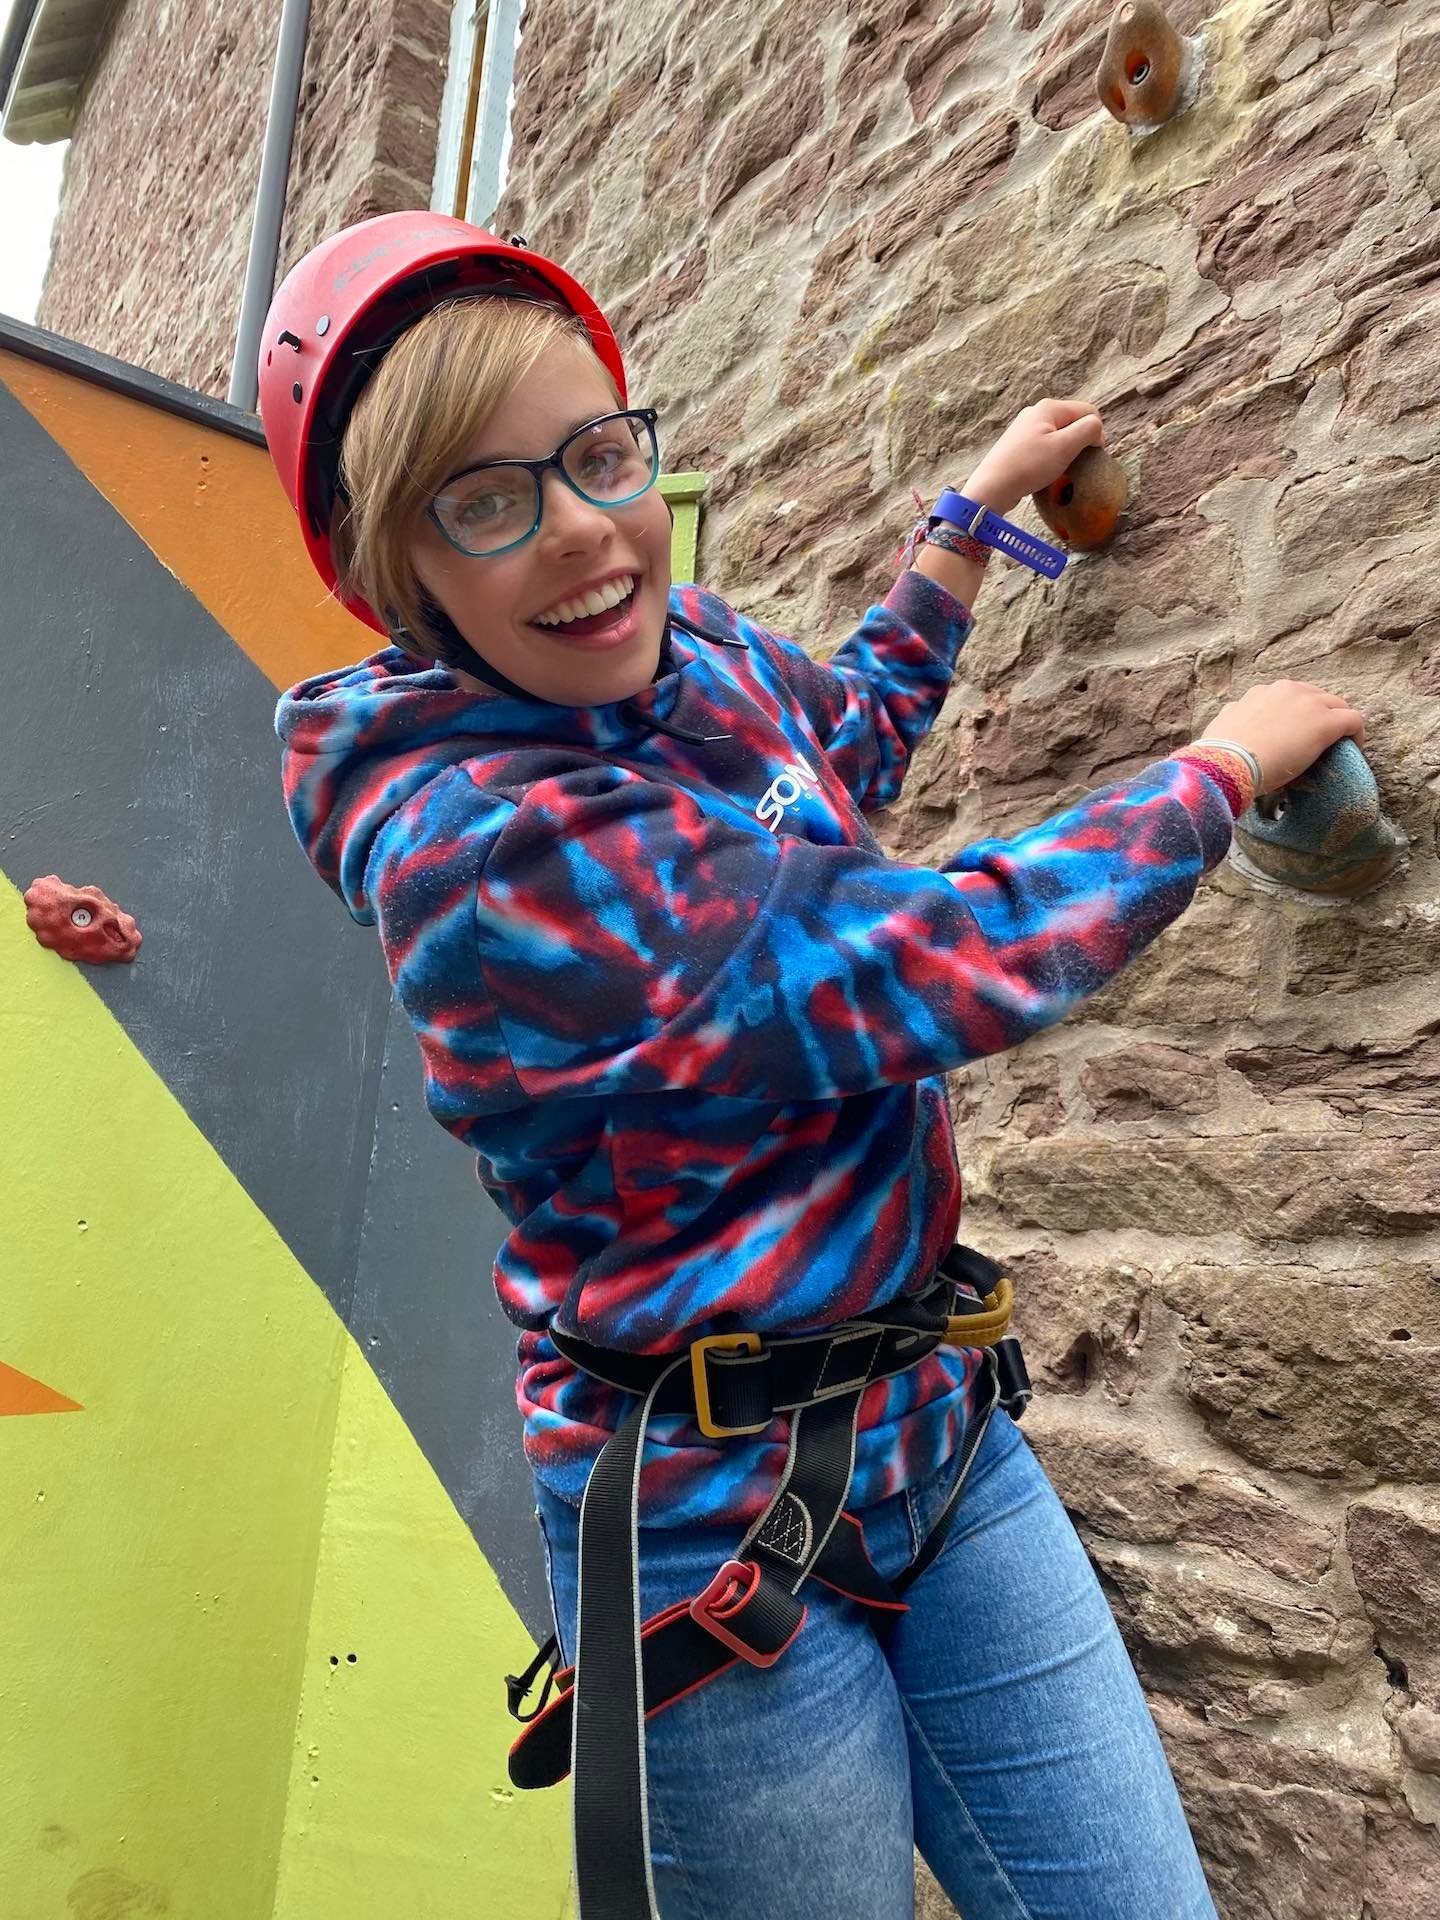 Climbing wall challenges for children on our summer holidays 2022